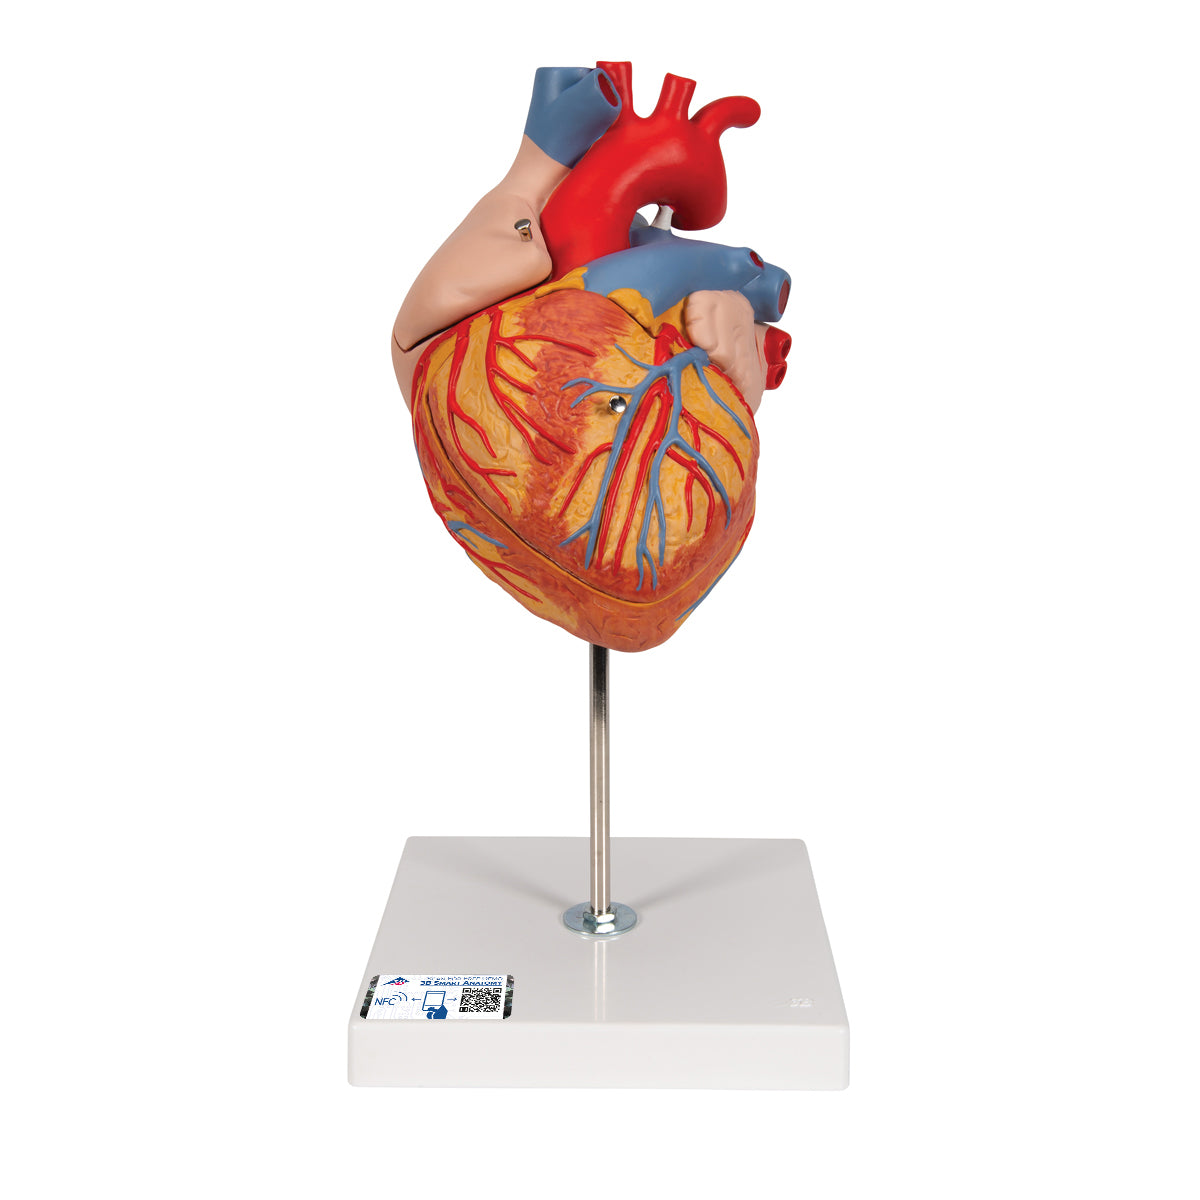 Hand painted heart model that has been enlarged